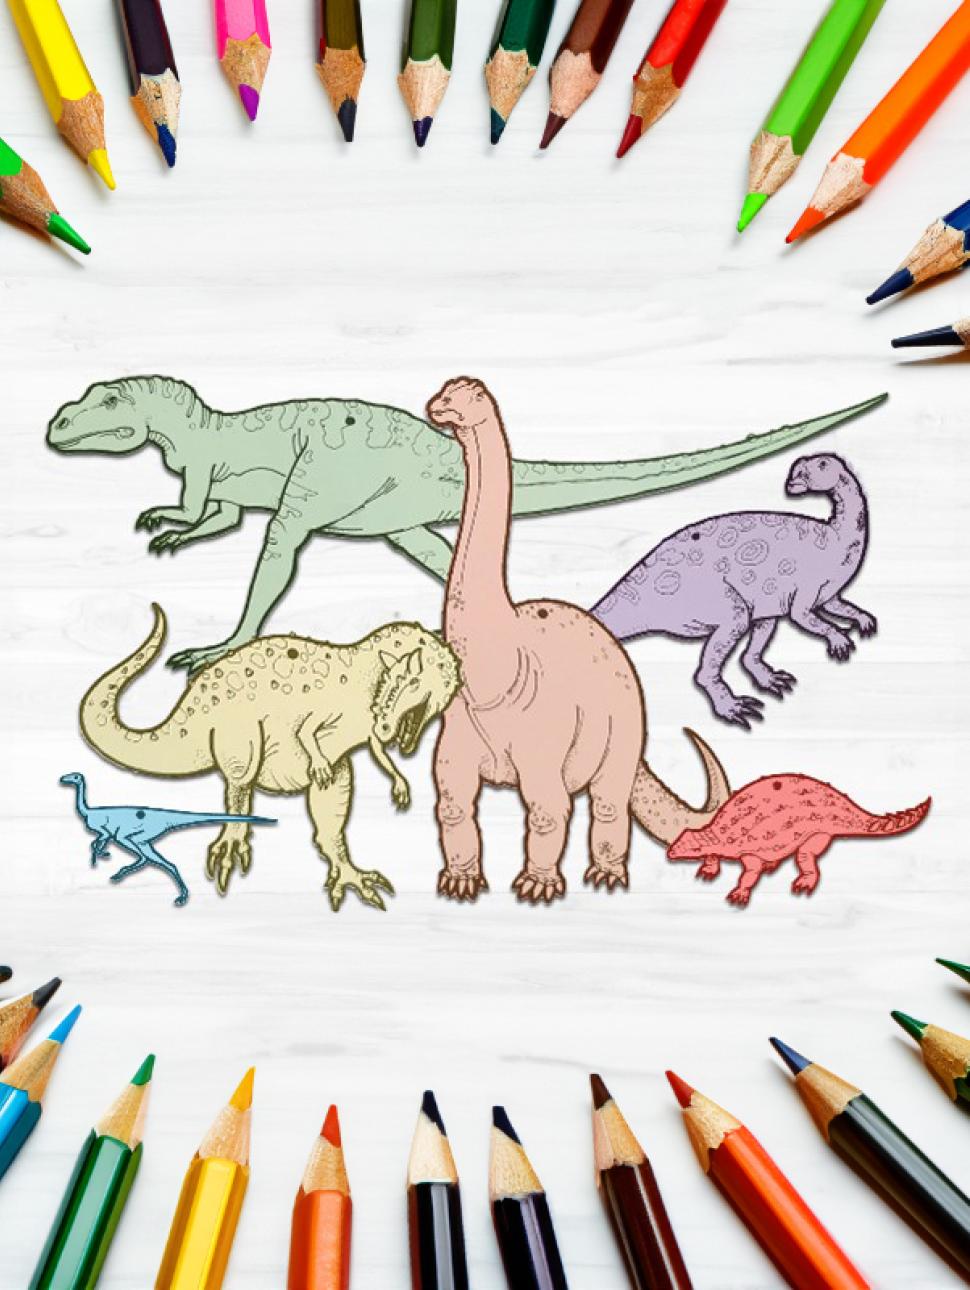 How to draw a T Rex step by step - Dinosaur drawing and coloring - YouTube